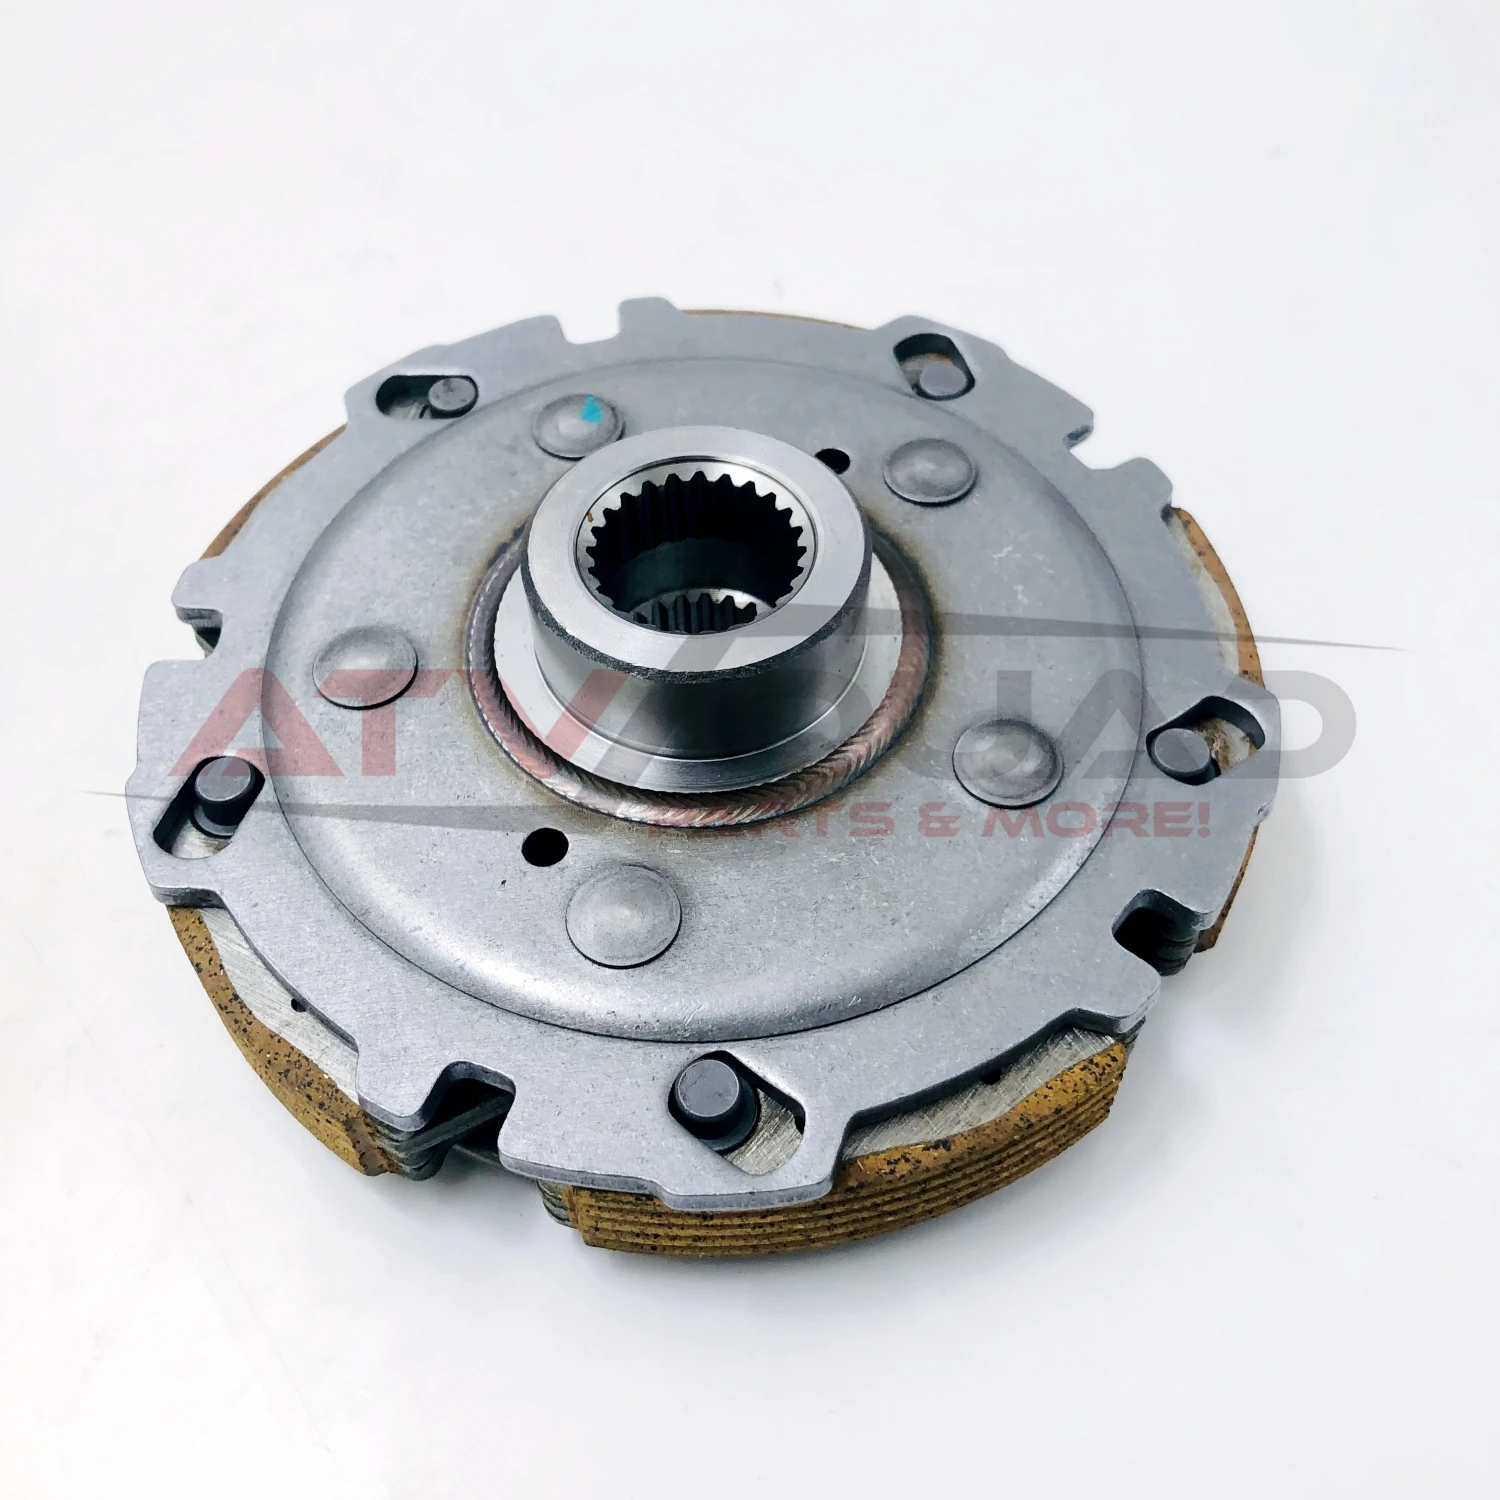 Wet Clutch Assy for Coleman Outfitter 400 UTV Trail Tamer 360 AT400 ATV Massimo Knight 400 MSU 400 21230-003-0000